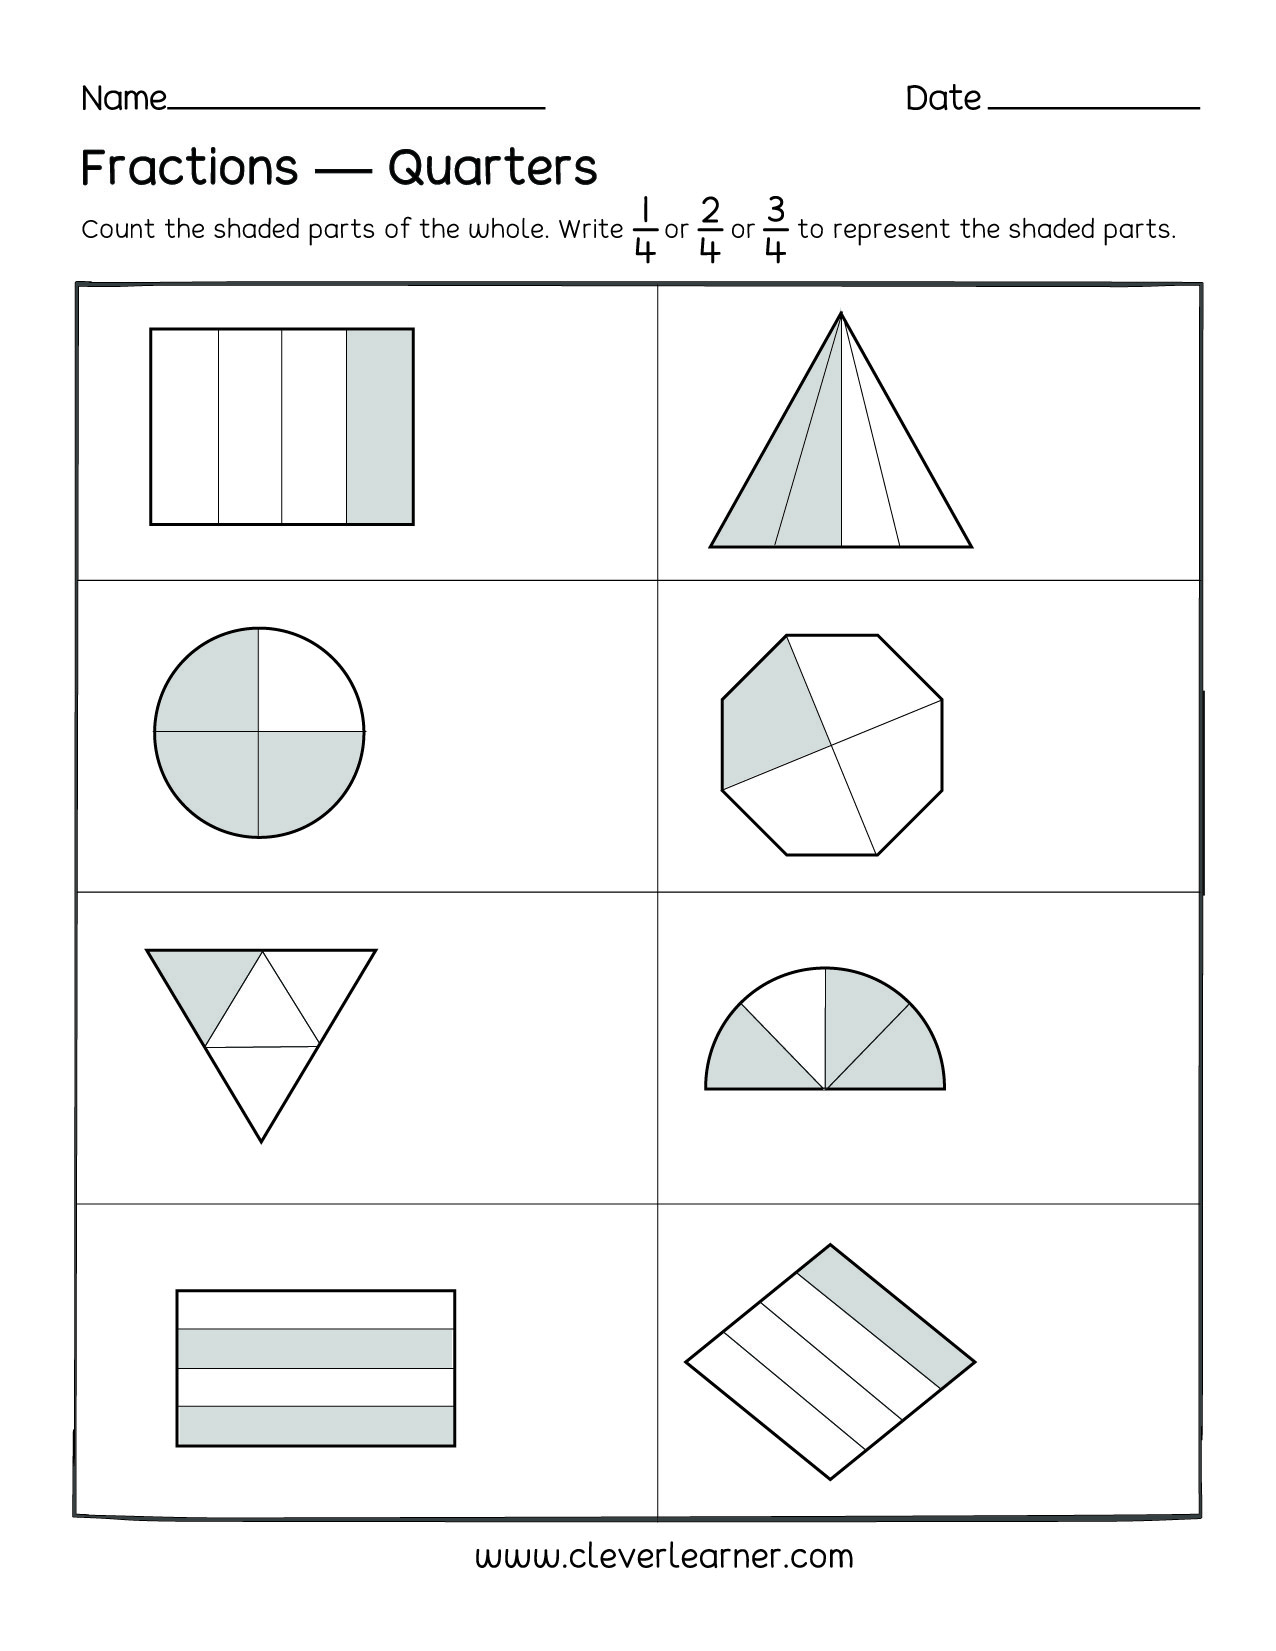 fun-activity-on-fractions-fourths-worksheets-for-children